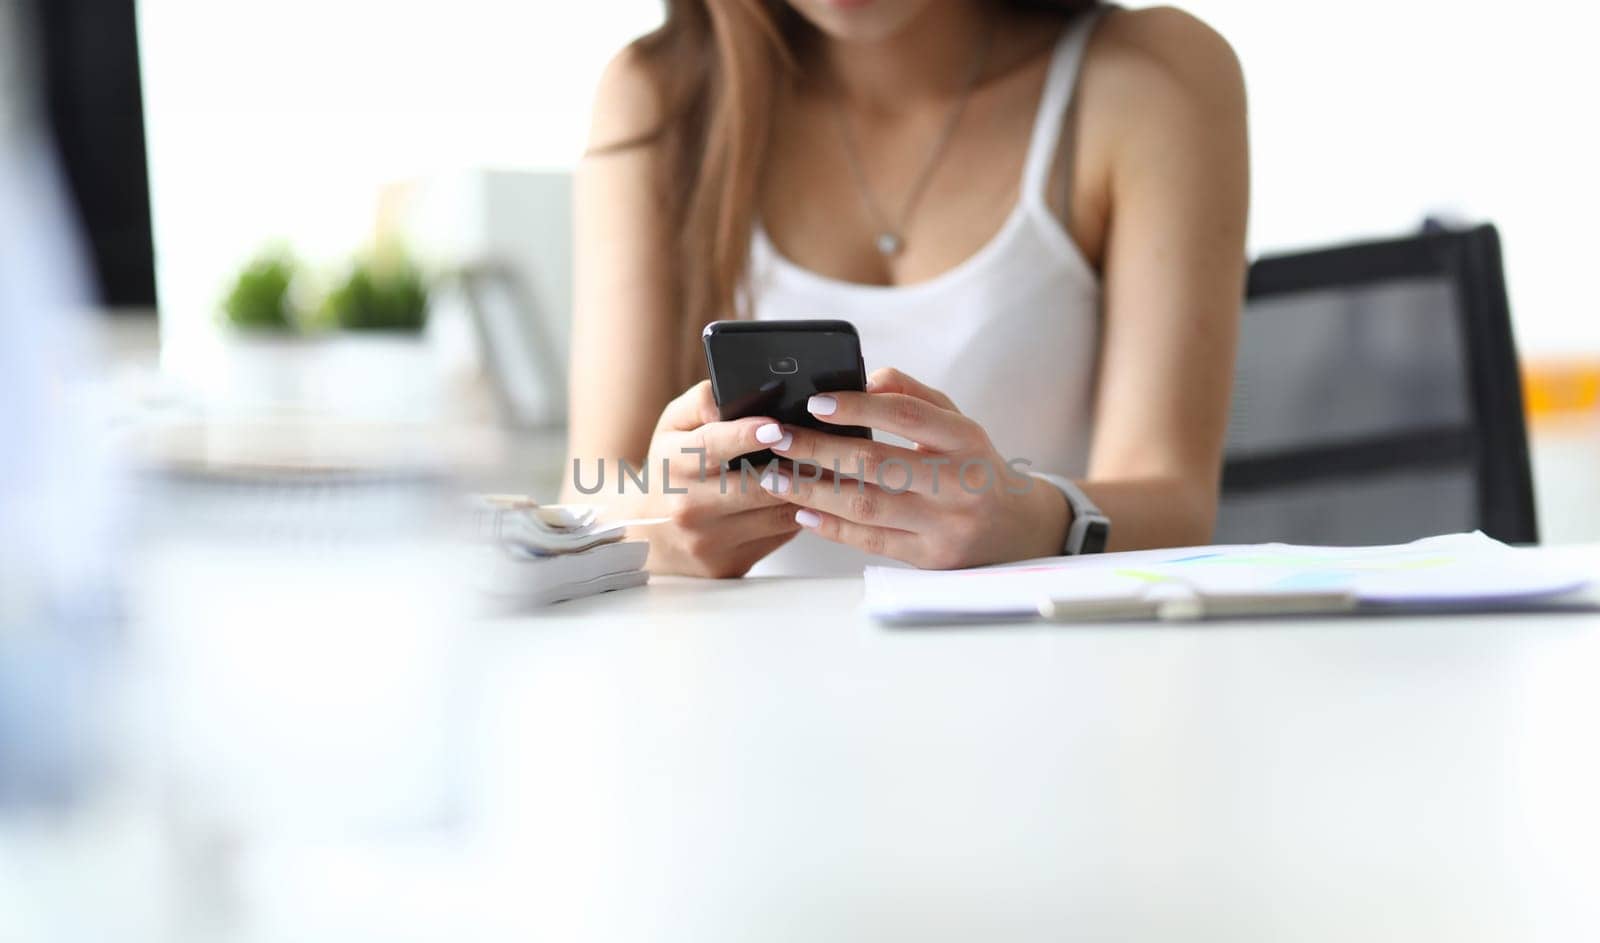 Focus on woman arms holding modern high-tech telephone. Smart lady sitting indoors and typing something on screen of mobile phone. Office concept. Blurred background